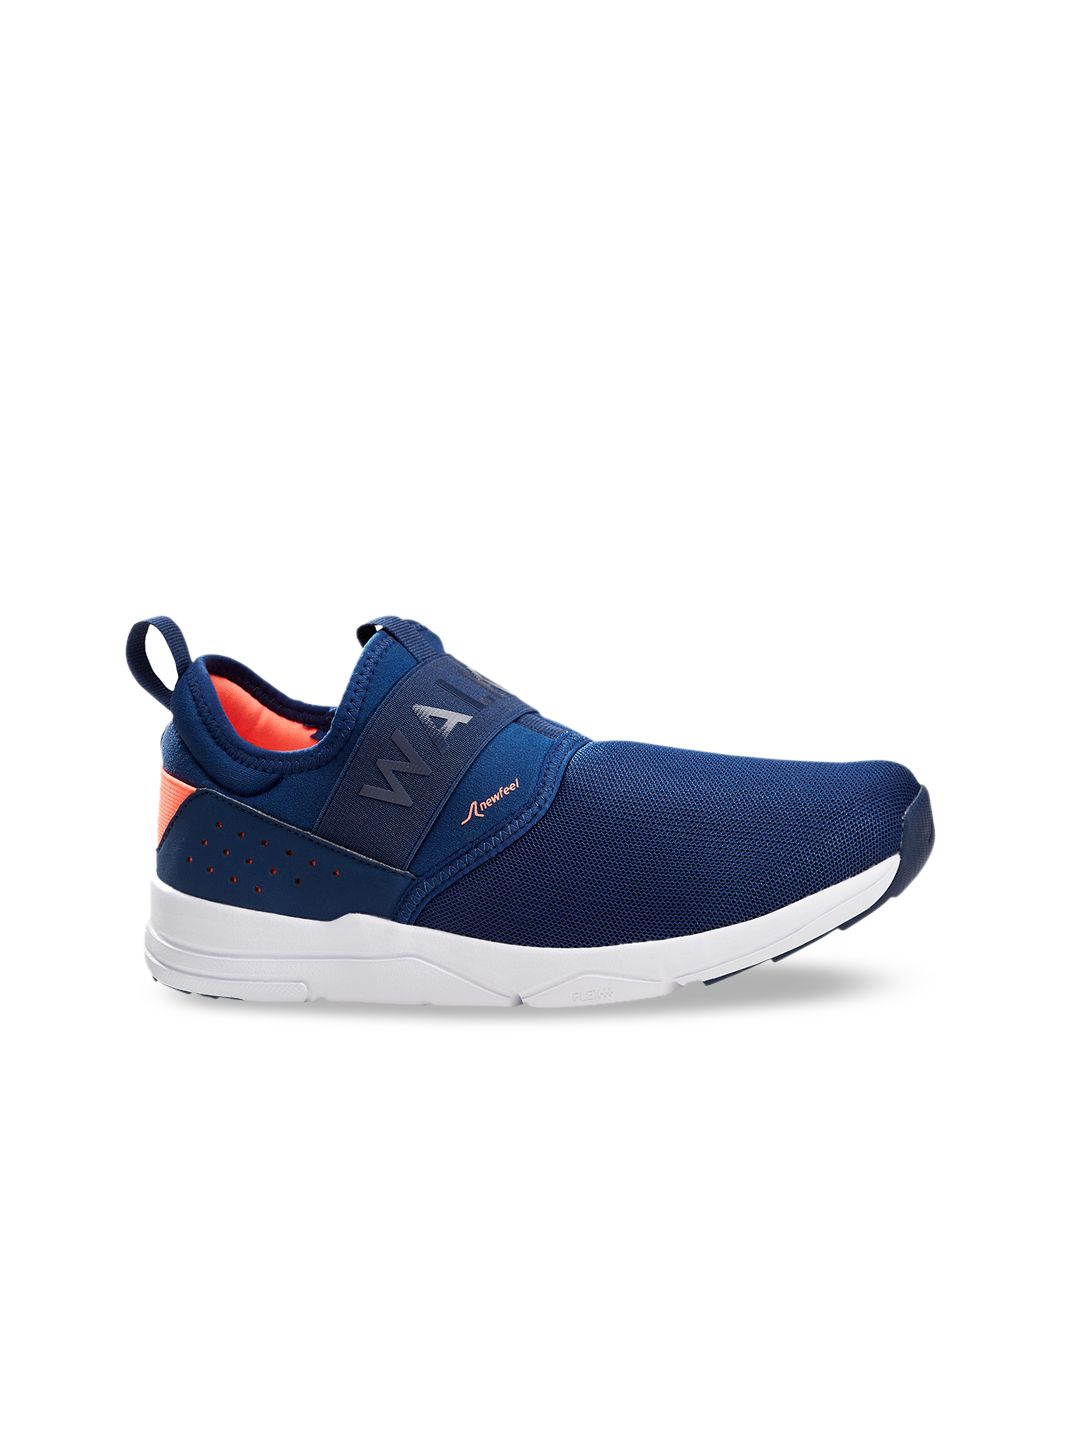 Newfeel By Decathlon Women Navy Blue Synthetic Walking Shoes Price in India